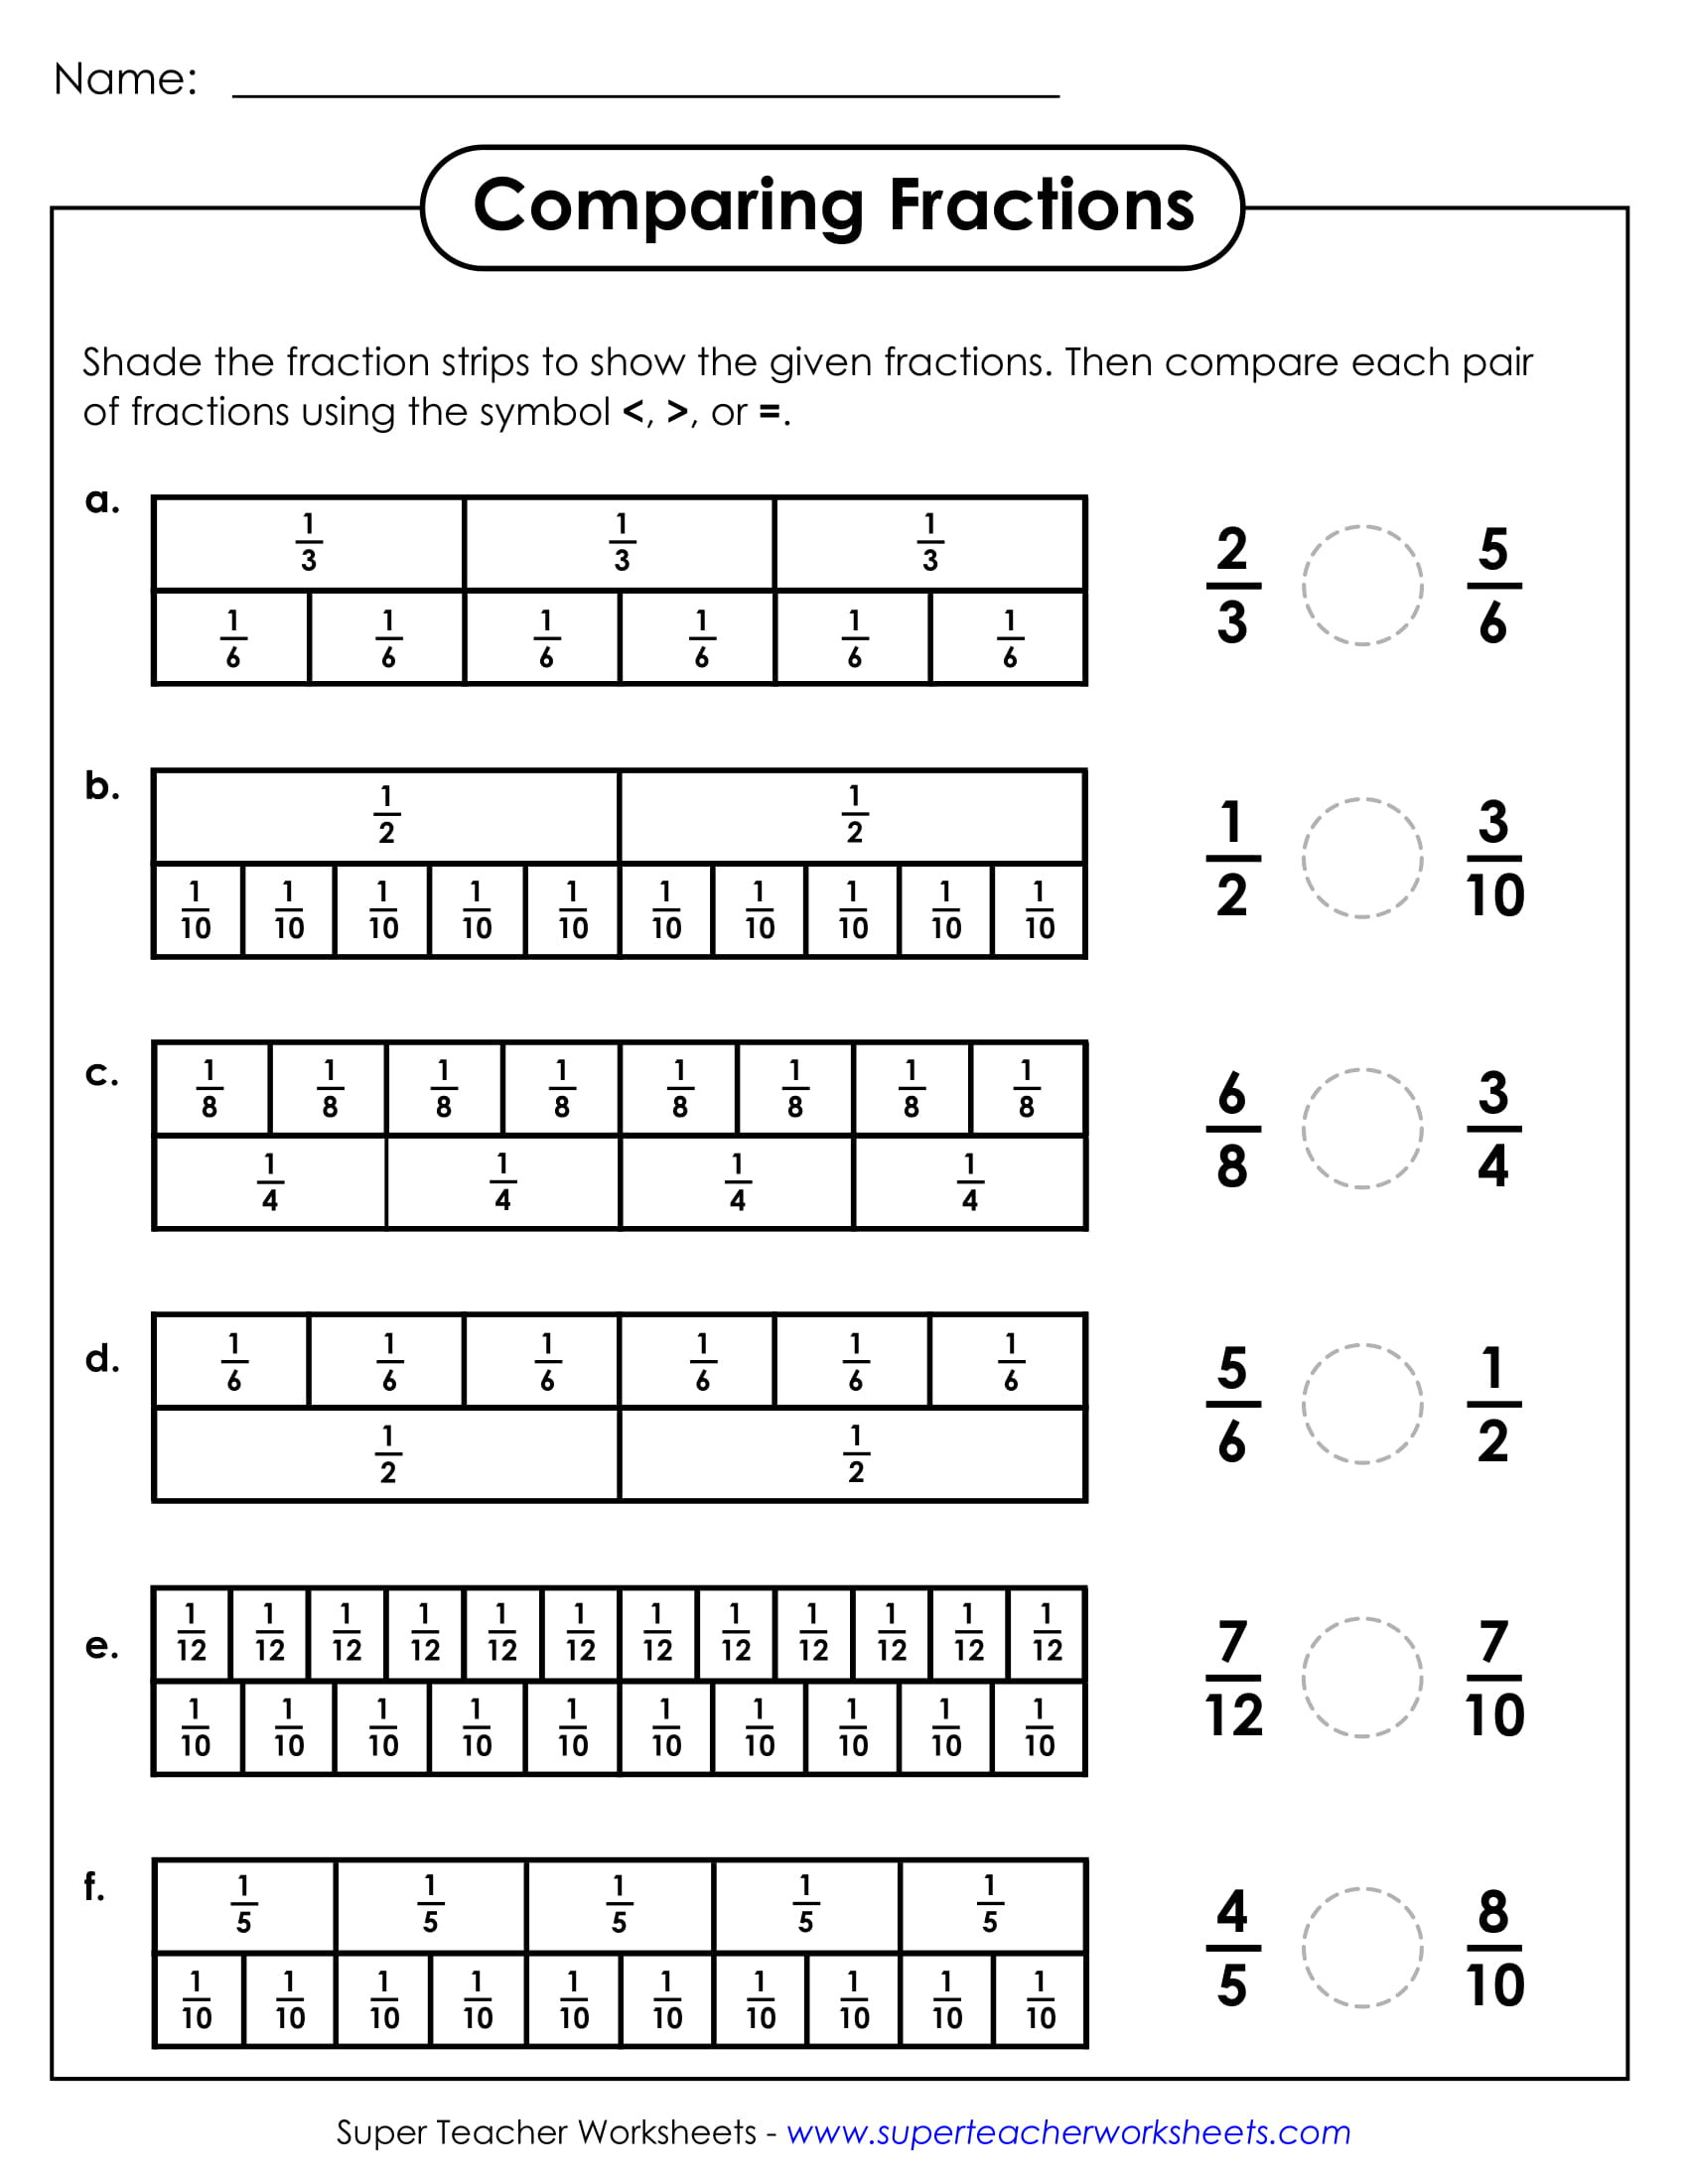 Adding Fractions Worksheet Pdf Fraction Worksheets Examples Pdf Fractions In Everyday Life